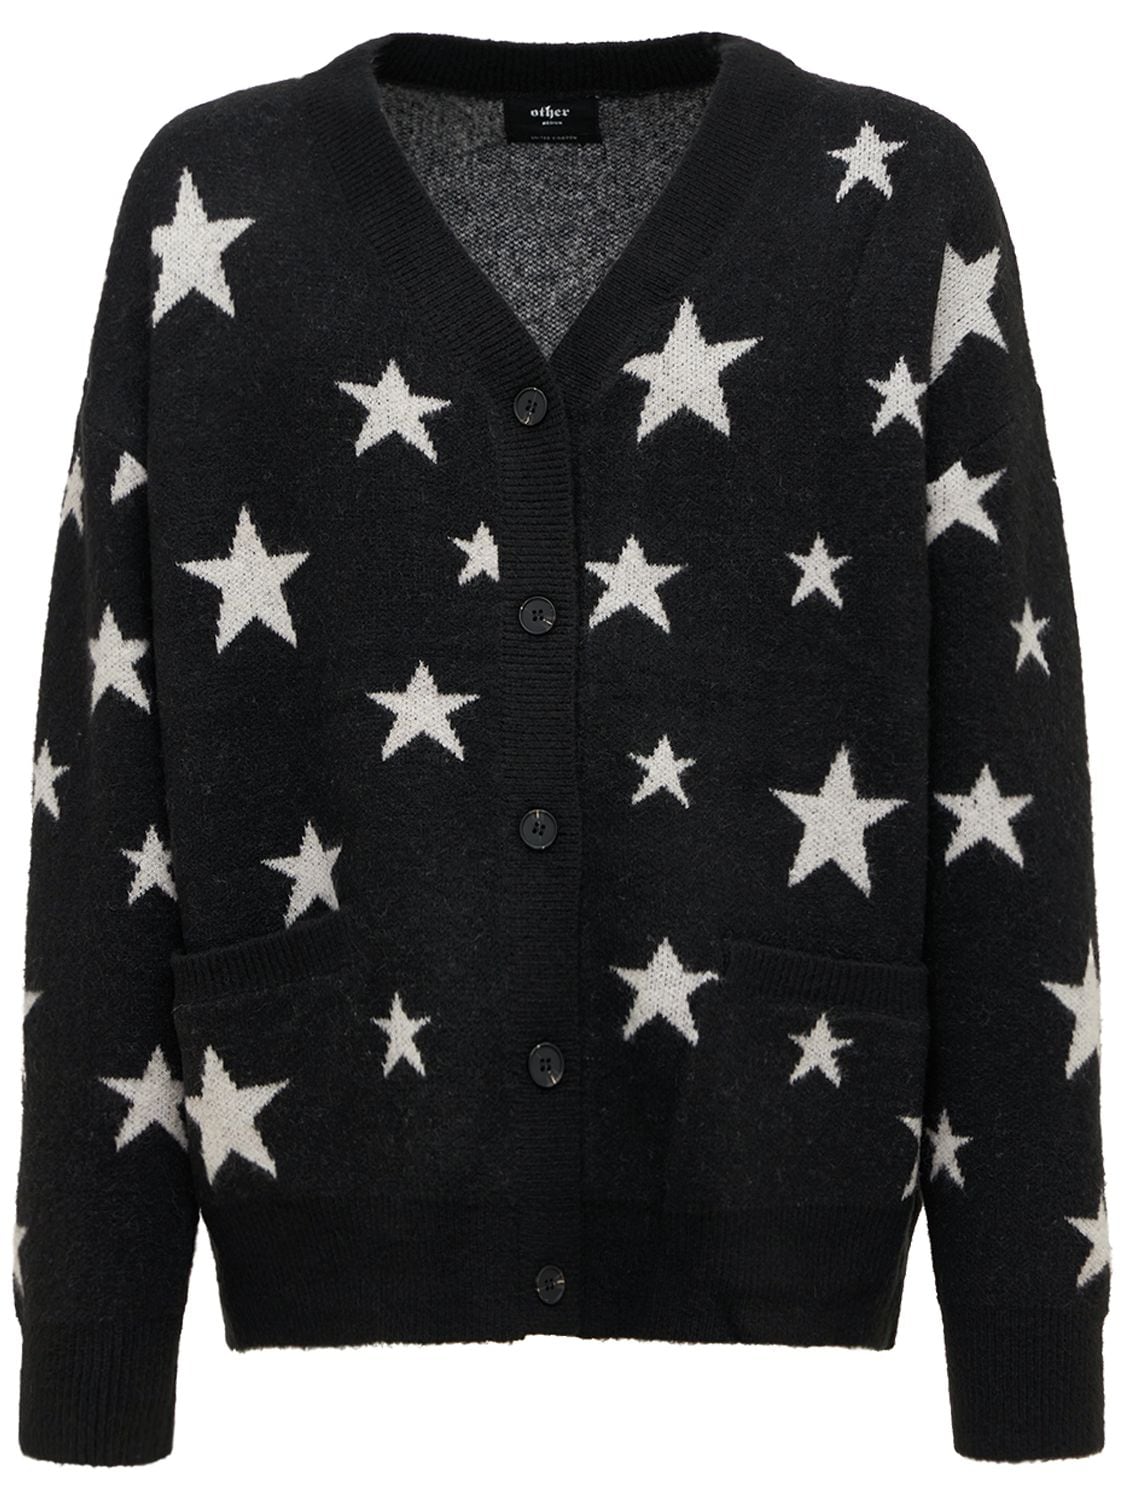 Other Stars Acrylic Blend Knit Cardigan In Black